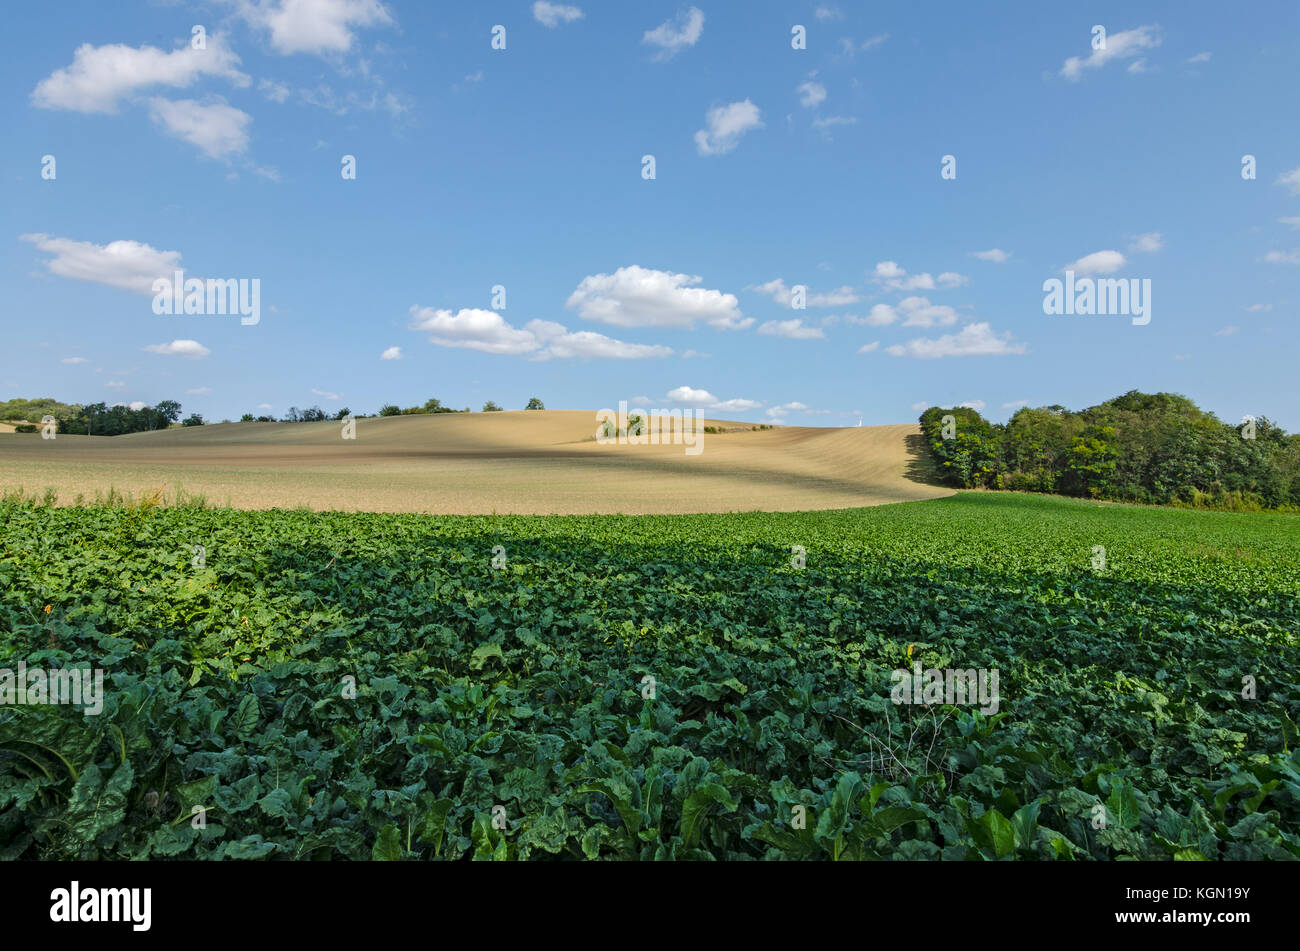 A scenic rural landscape with a field of green vegetables Stock Photo